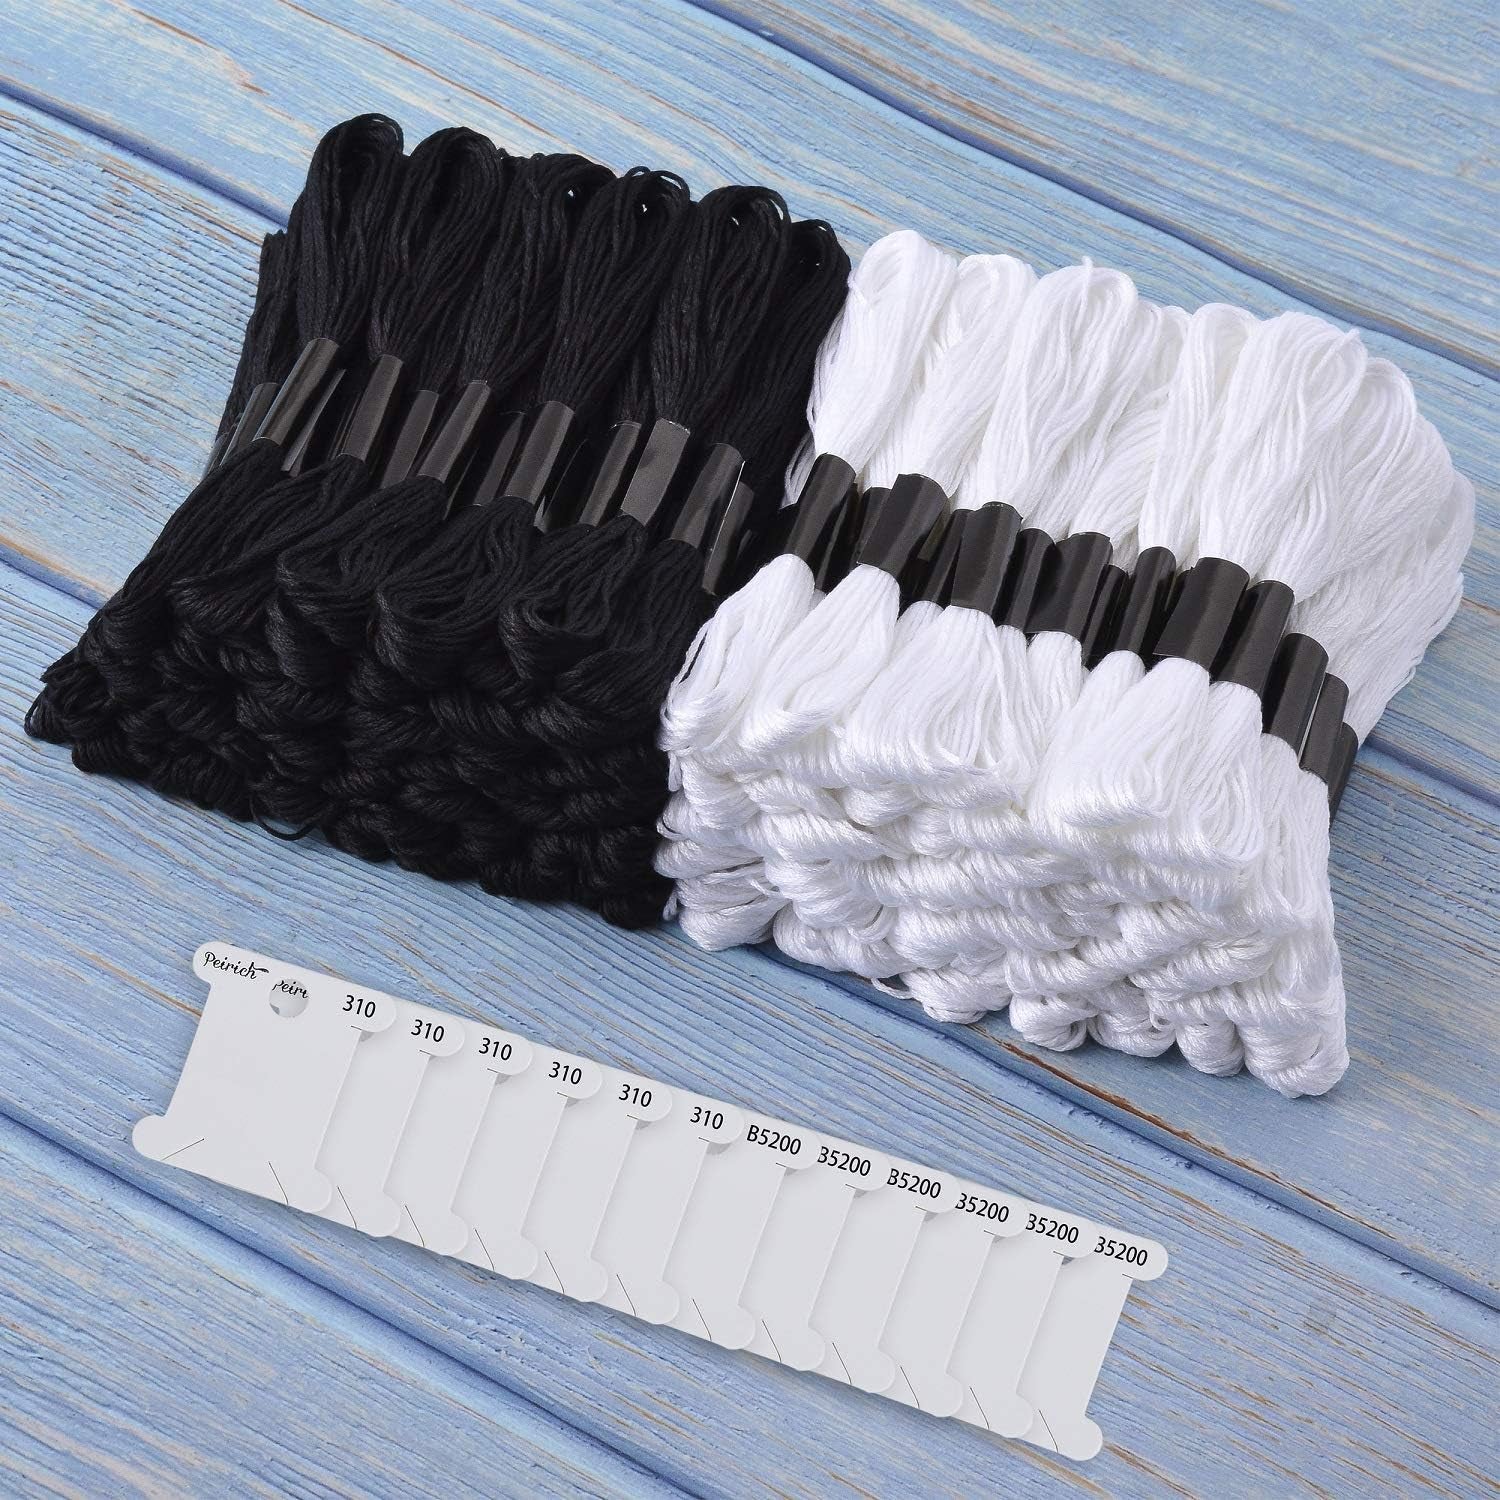 96 Black White Skeins Stranded Cross Stitch Floss Friendship Bracelets String Embroidery Thread with 12 Pieces Floss Bobbins, Cross Stitch Project